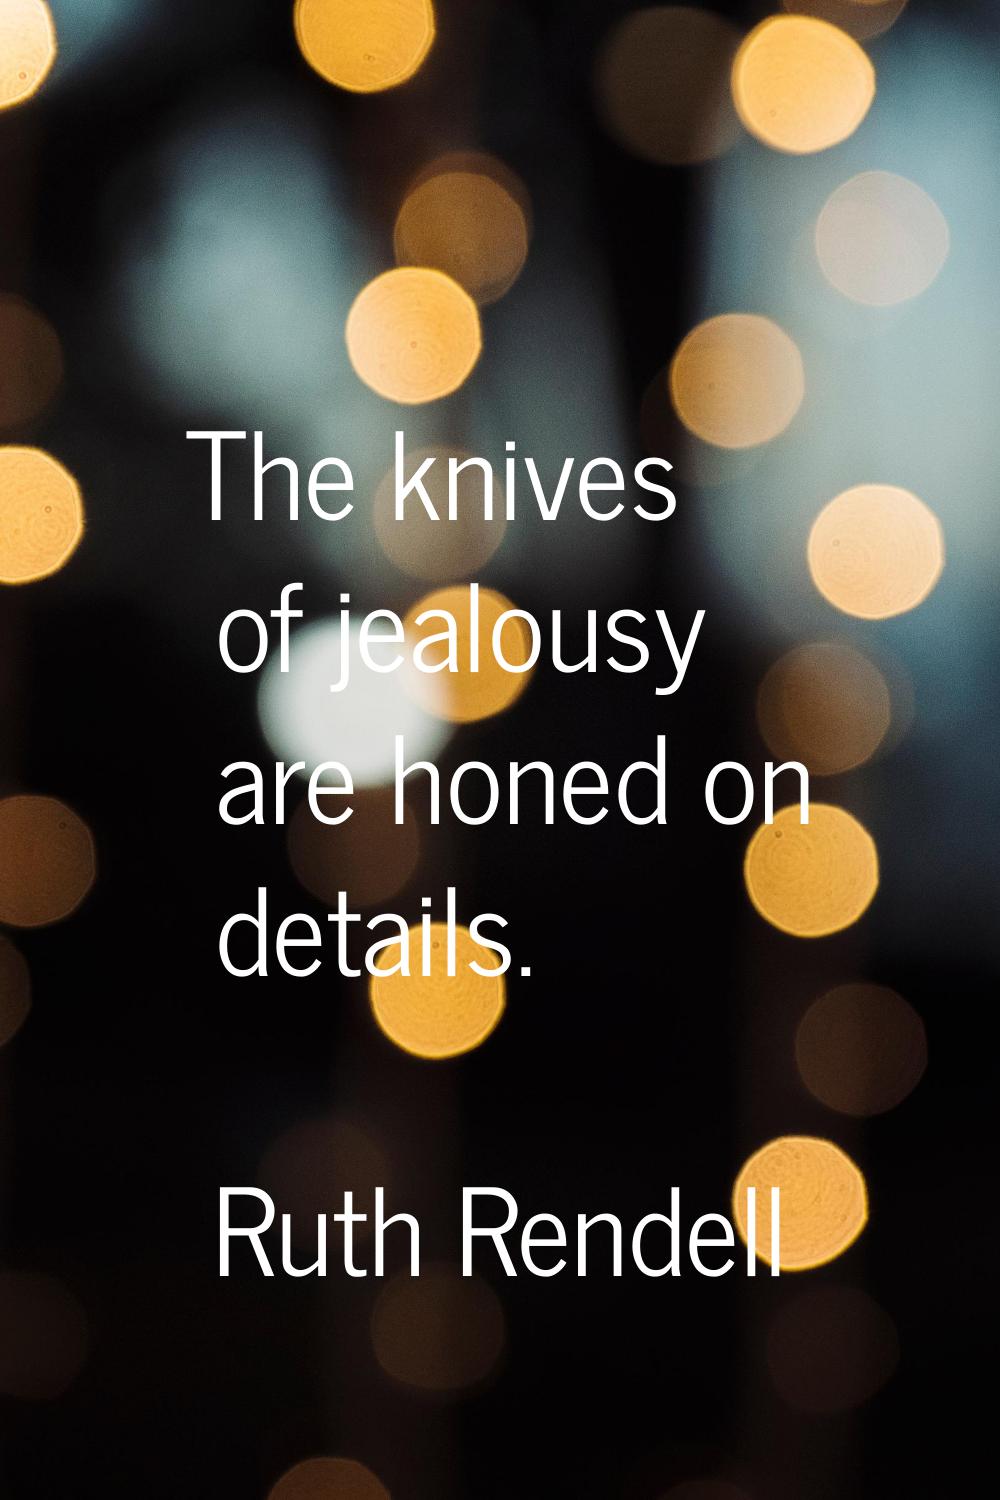 The knives of jealousy are honed on details.